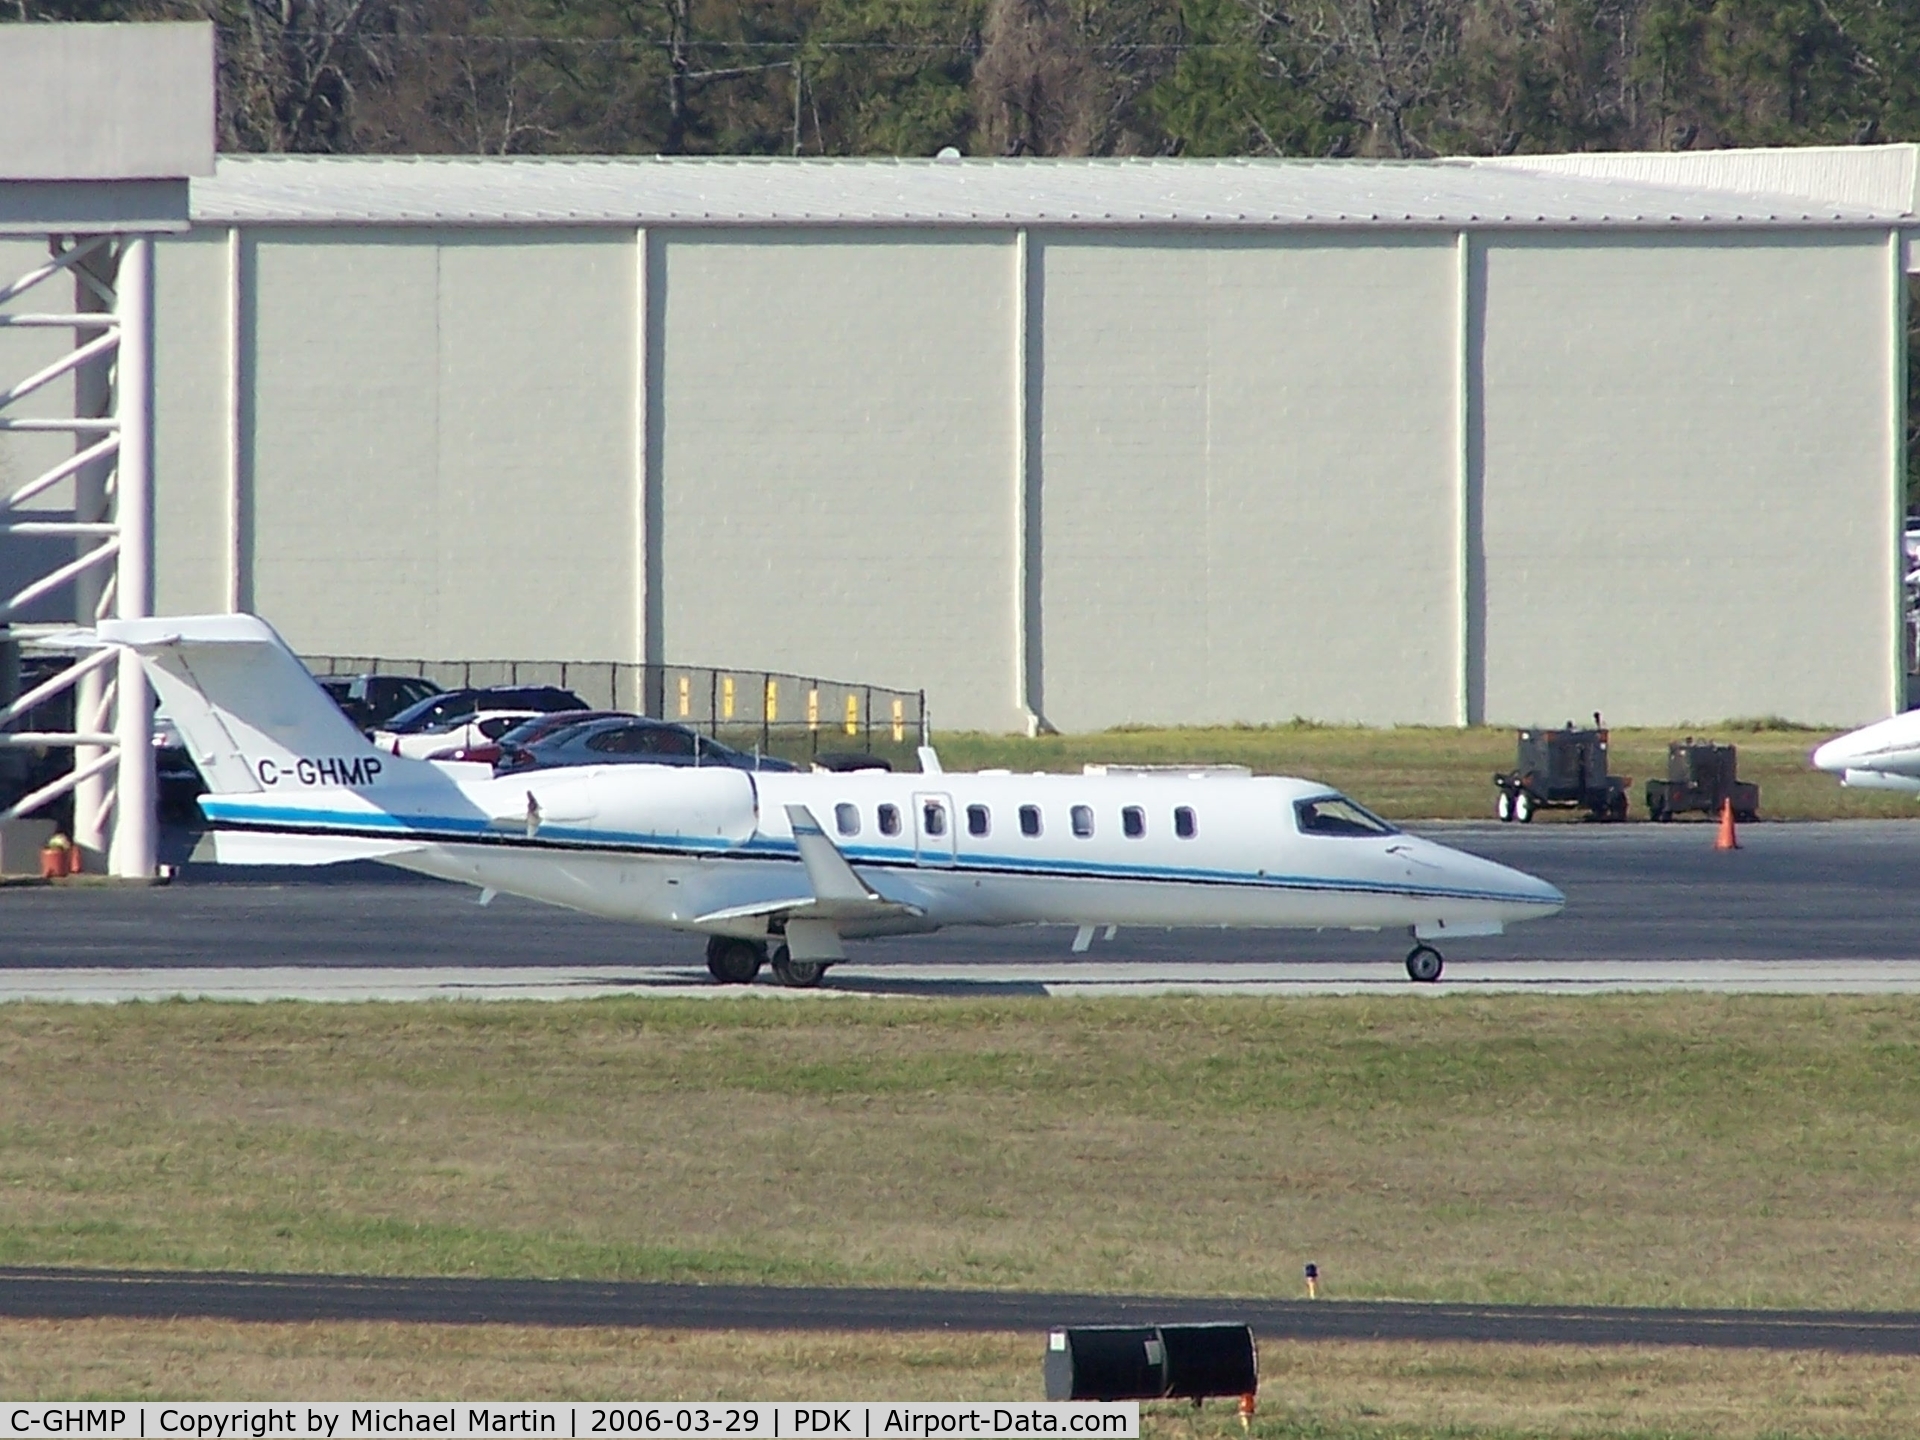 C-GHMP, 2001 Learjet 45 C/N 183, Taxing to 20L